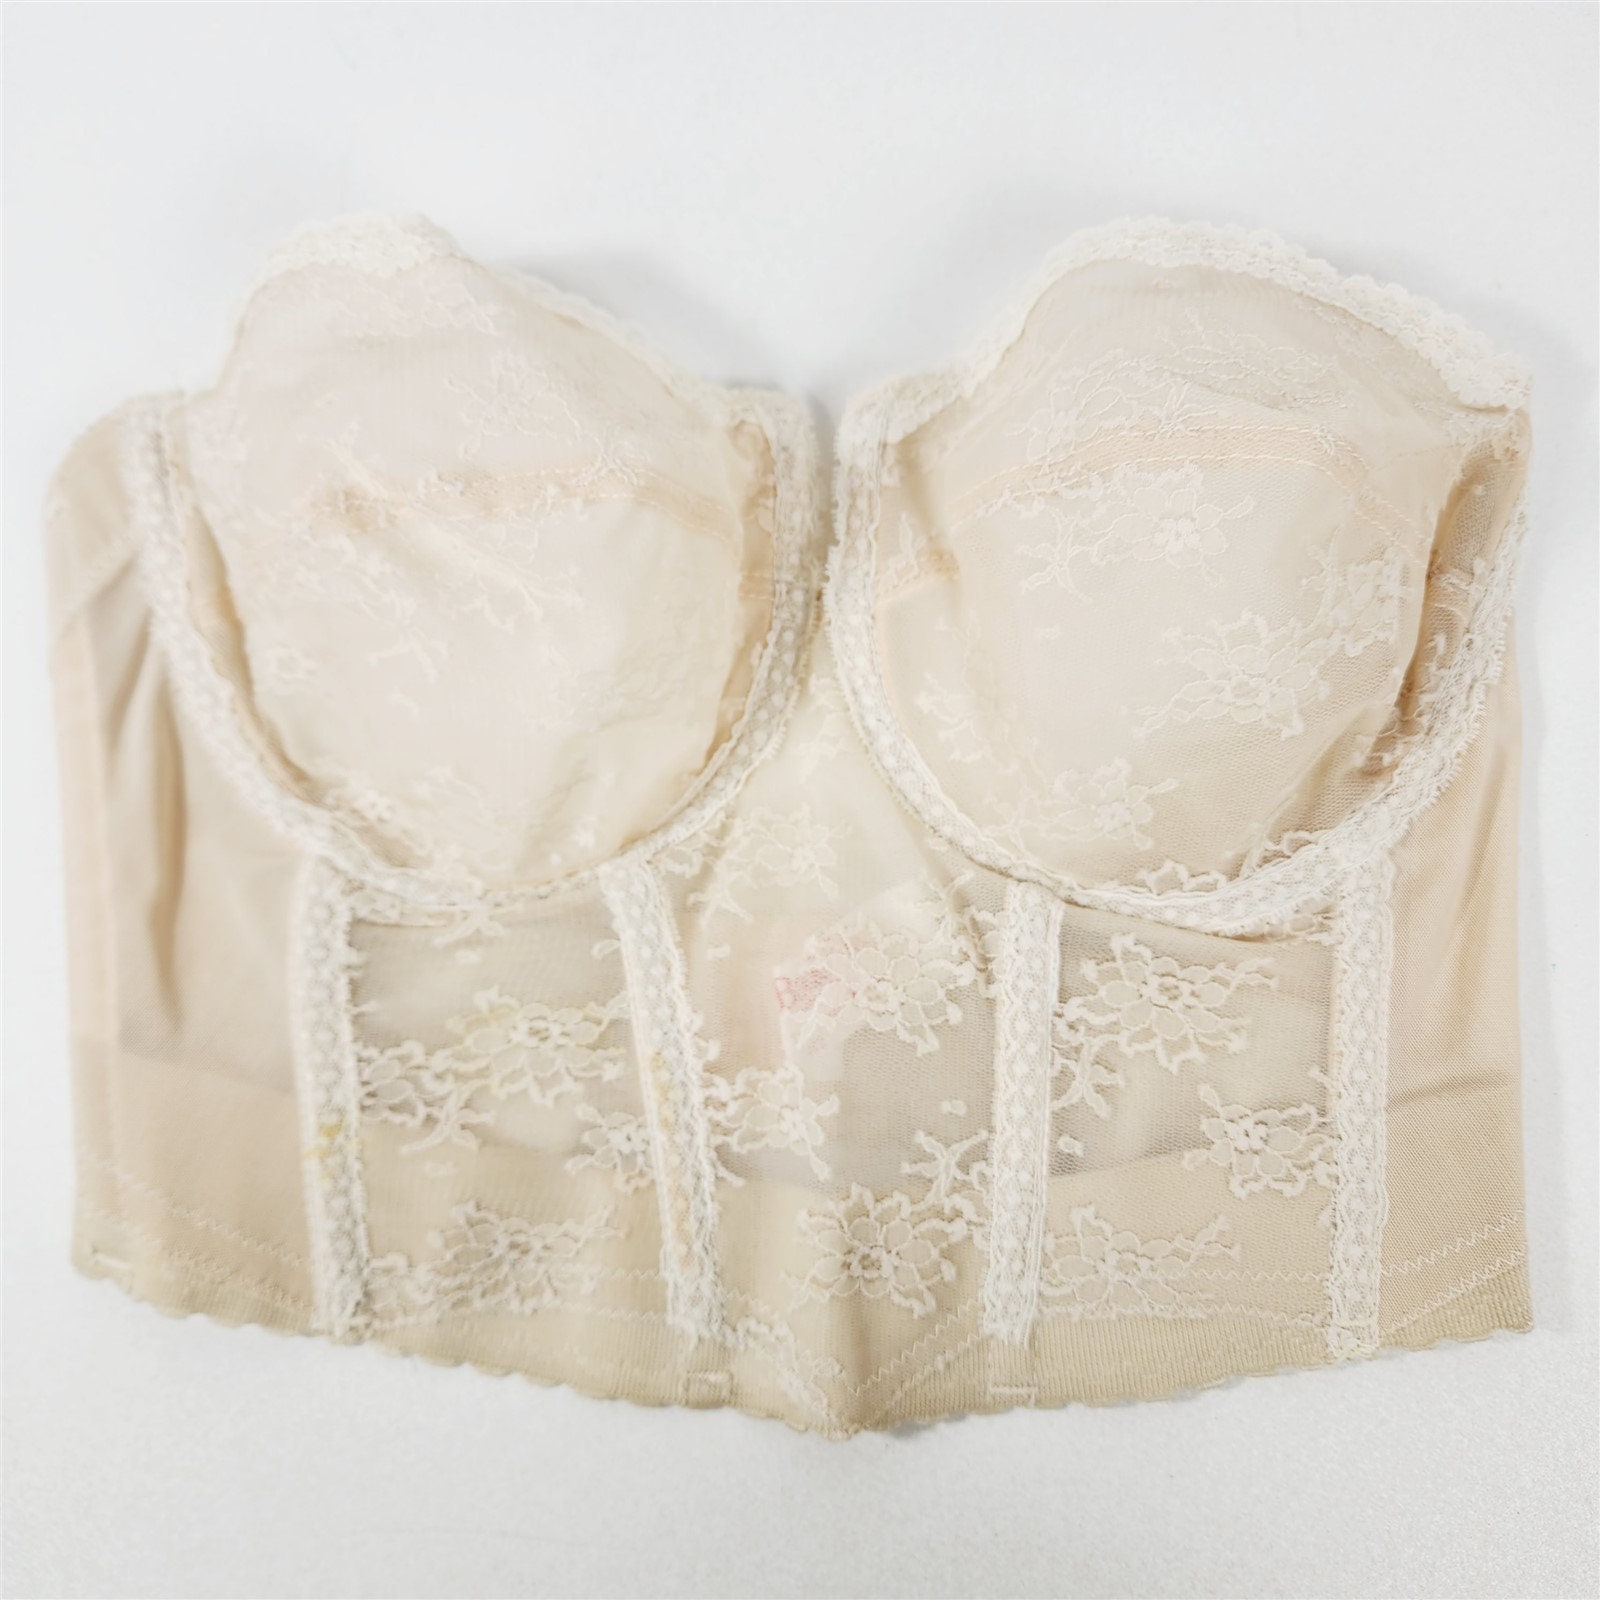 Black Lace Bra in White French Calais Lace and Nude Lining